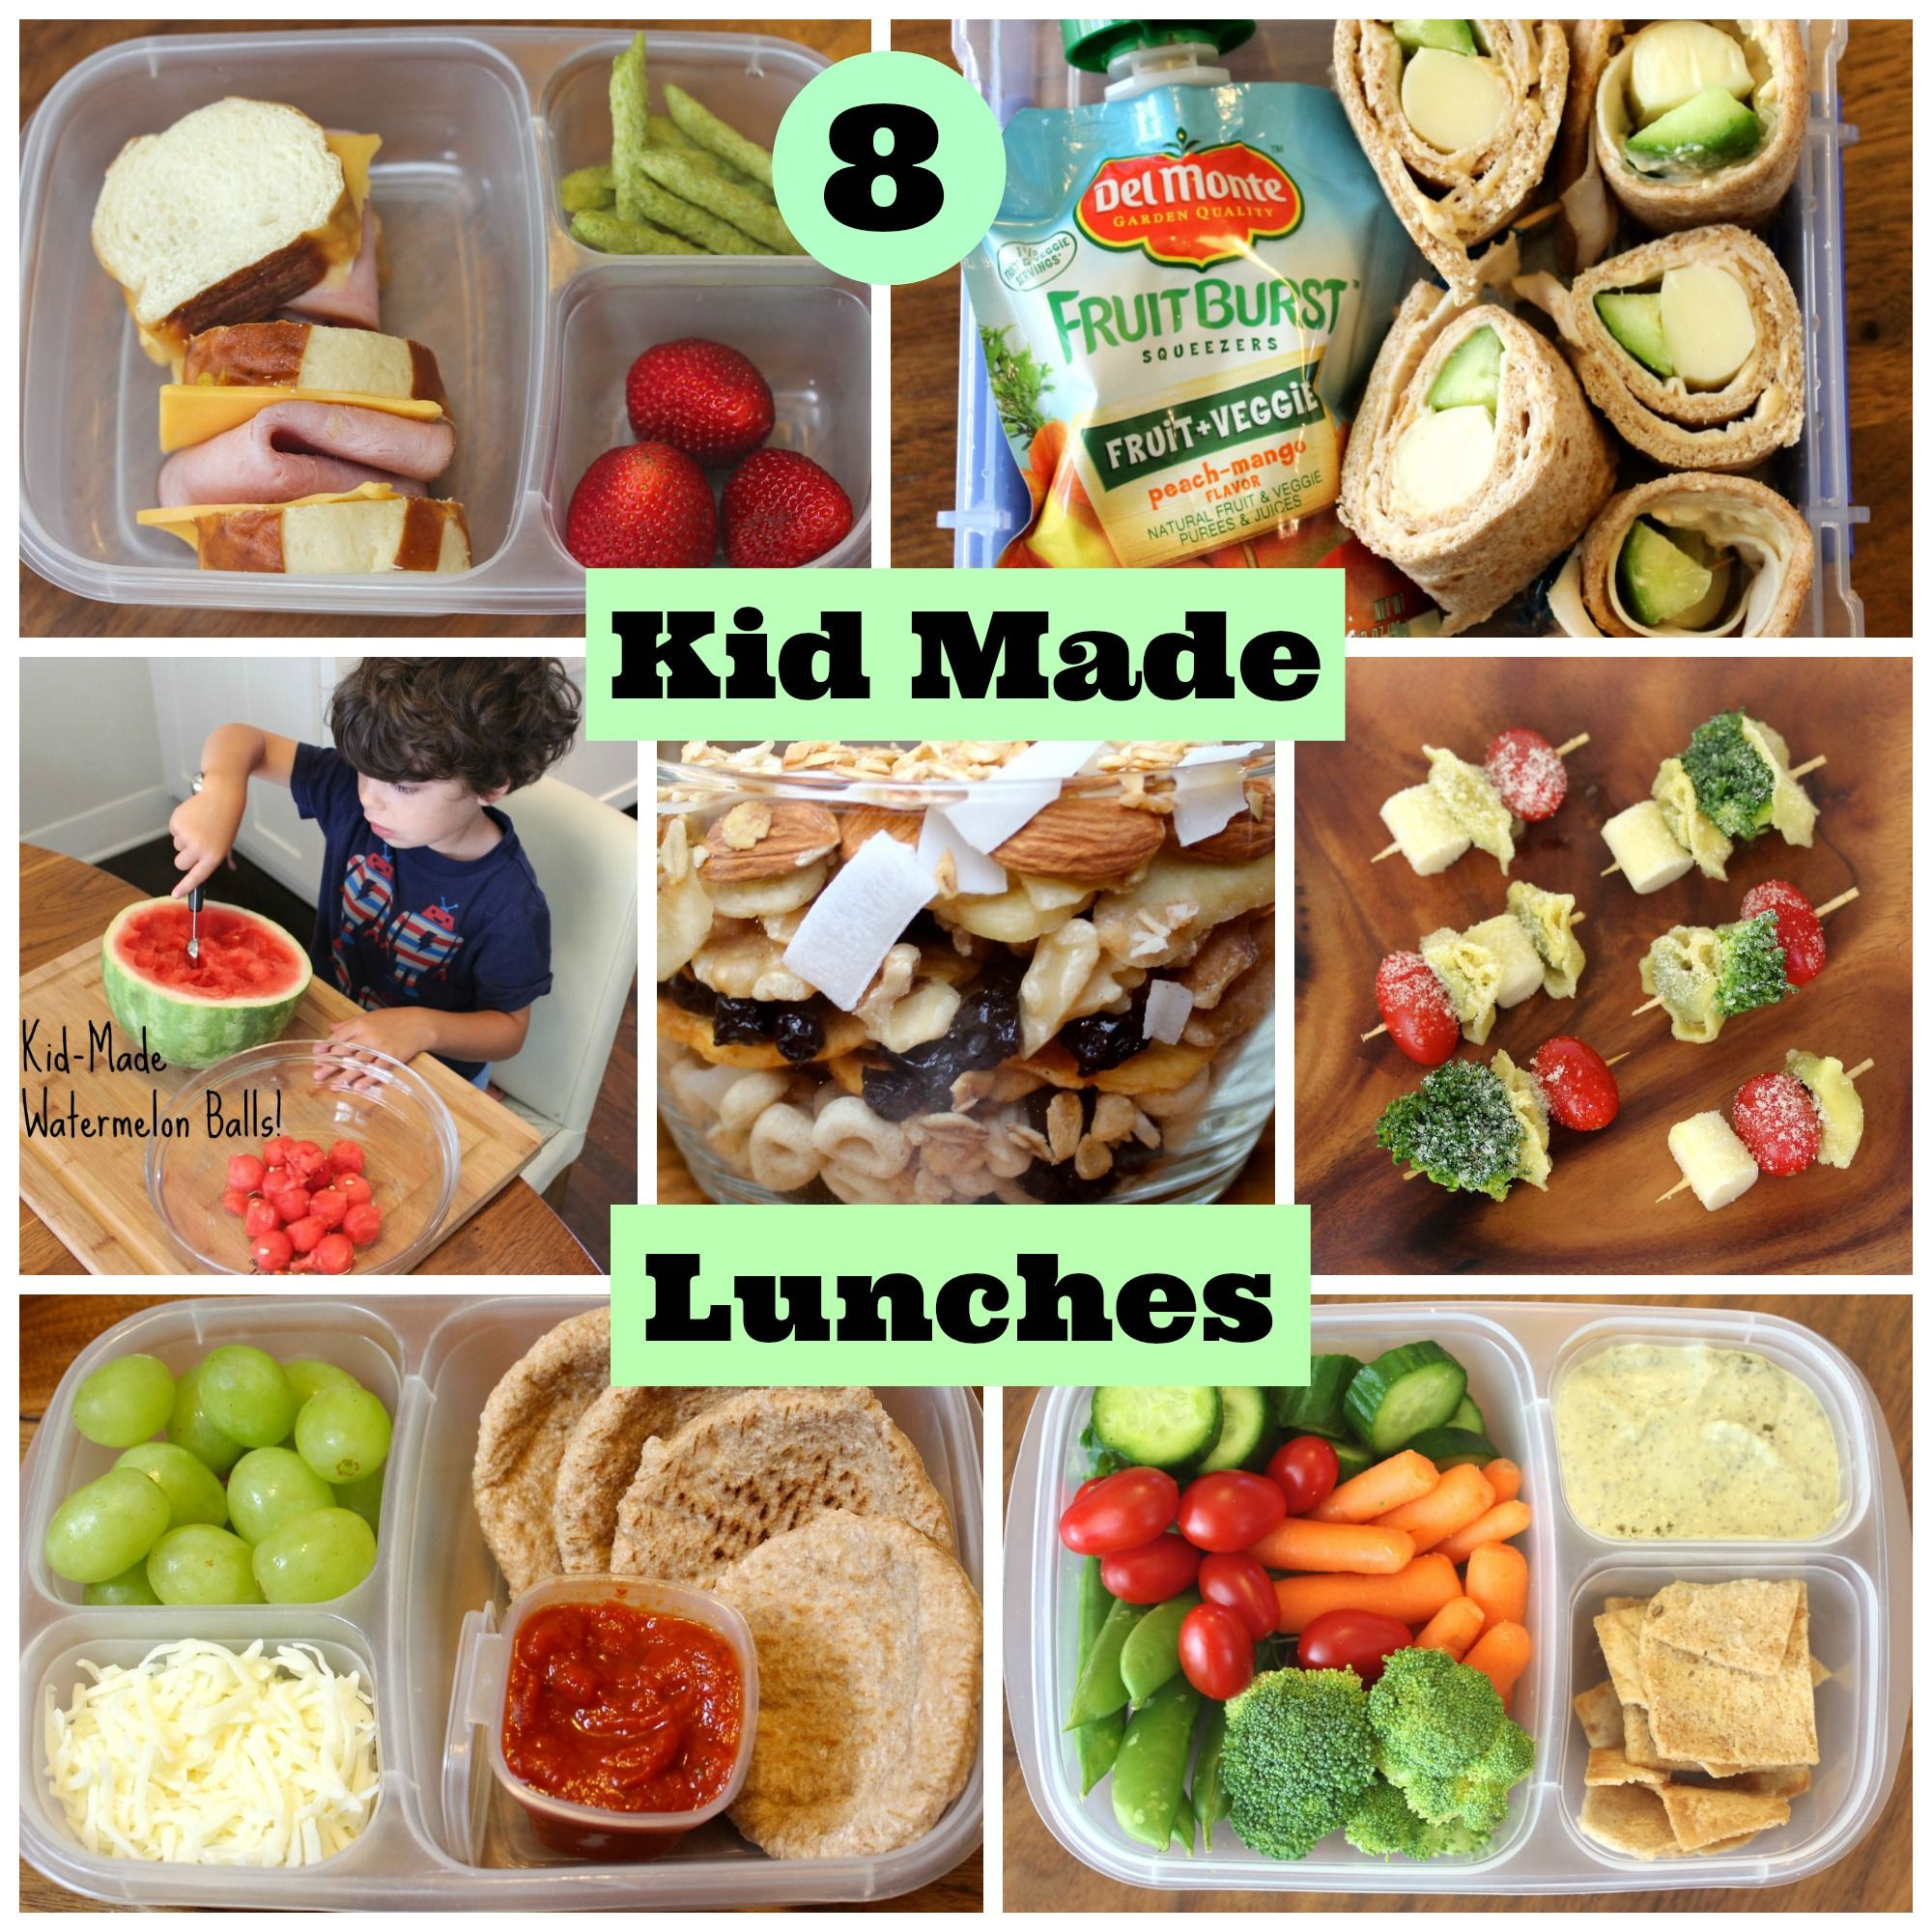 Healthy Lunches To Make
 4 Healthy School Lunches Your Kids Can Make Themselves